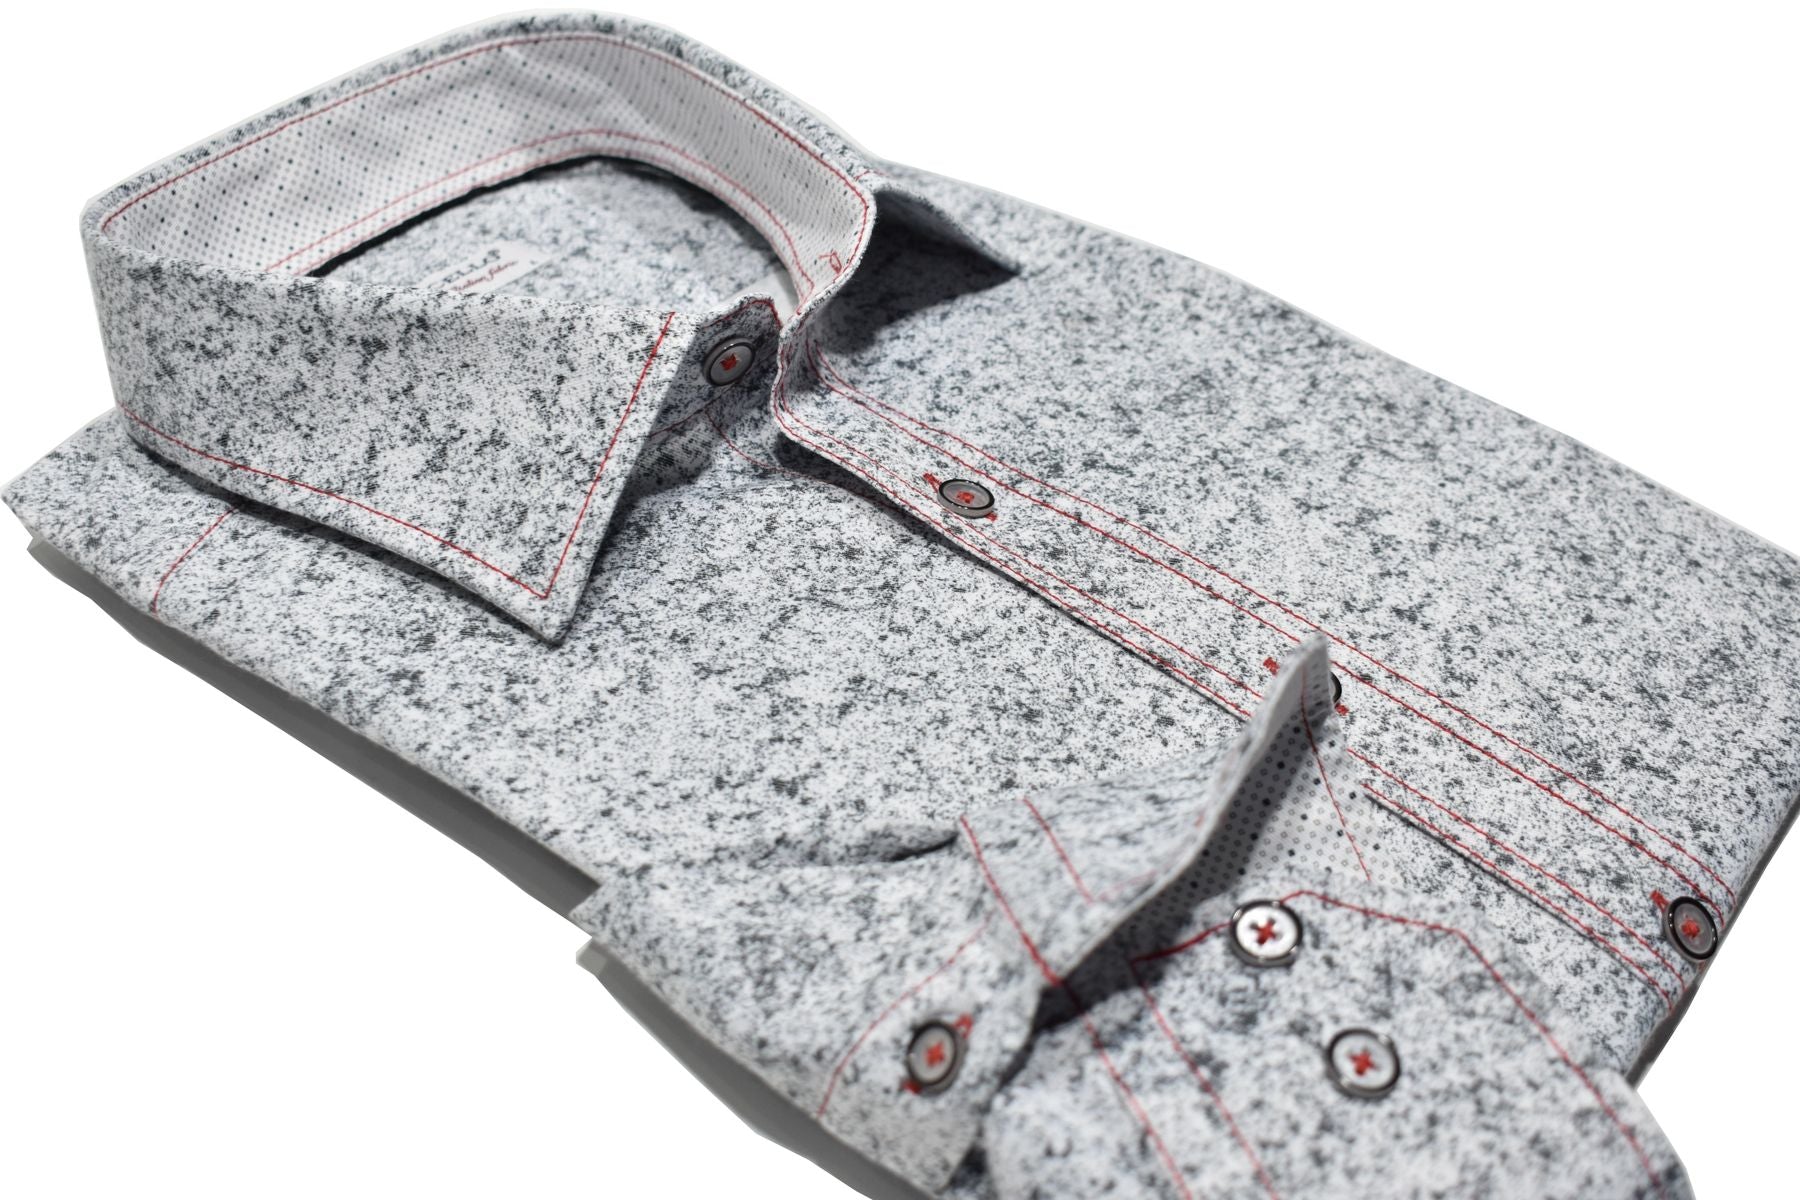 Look your sharpest with the W809 Connery Sport Shirt, combining gray and charcoal tones for a sophisticated look. Featuring contrast double stitching in red, custom matched buttons, and perfect trim fabric, this shirt is perfect for any occasion. Shirt by Marcello.